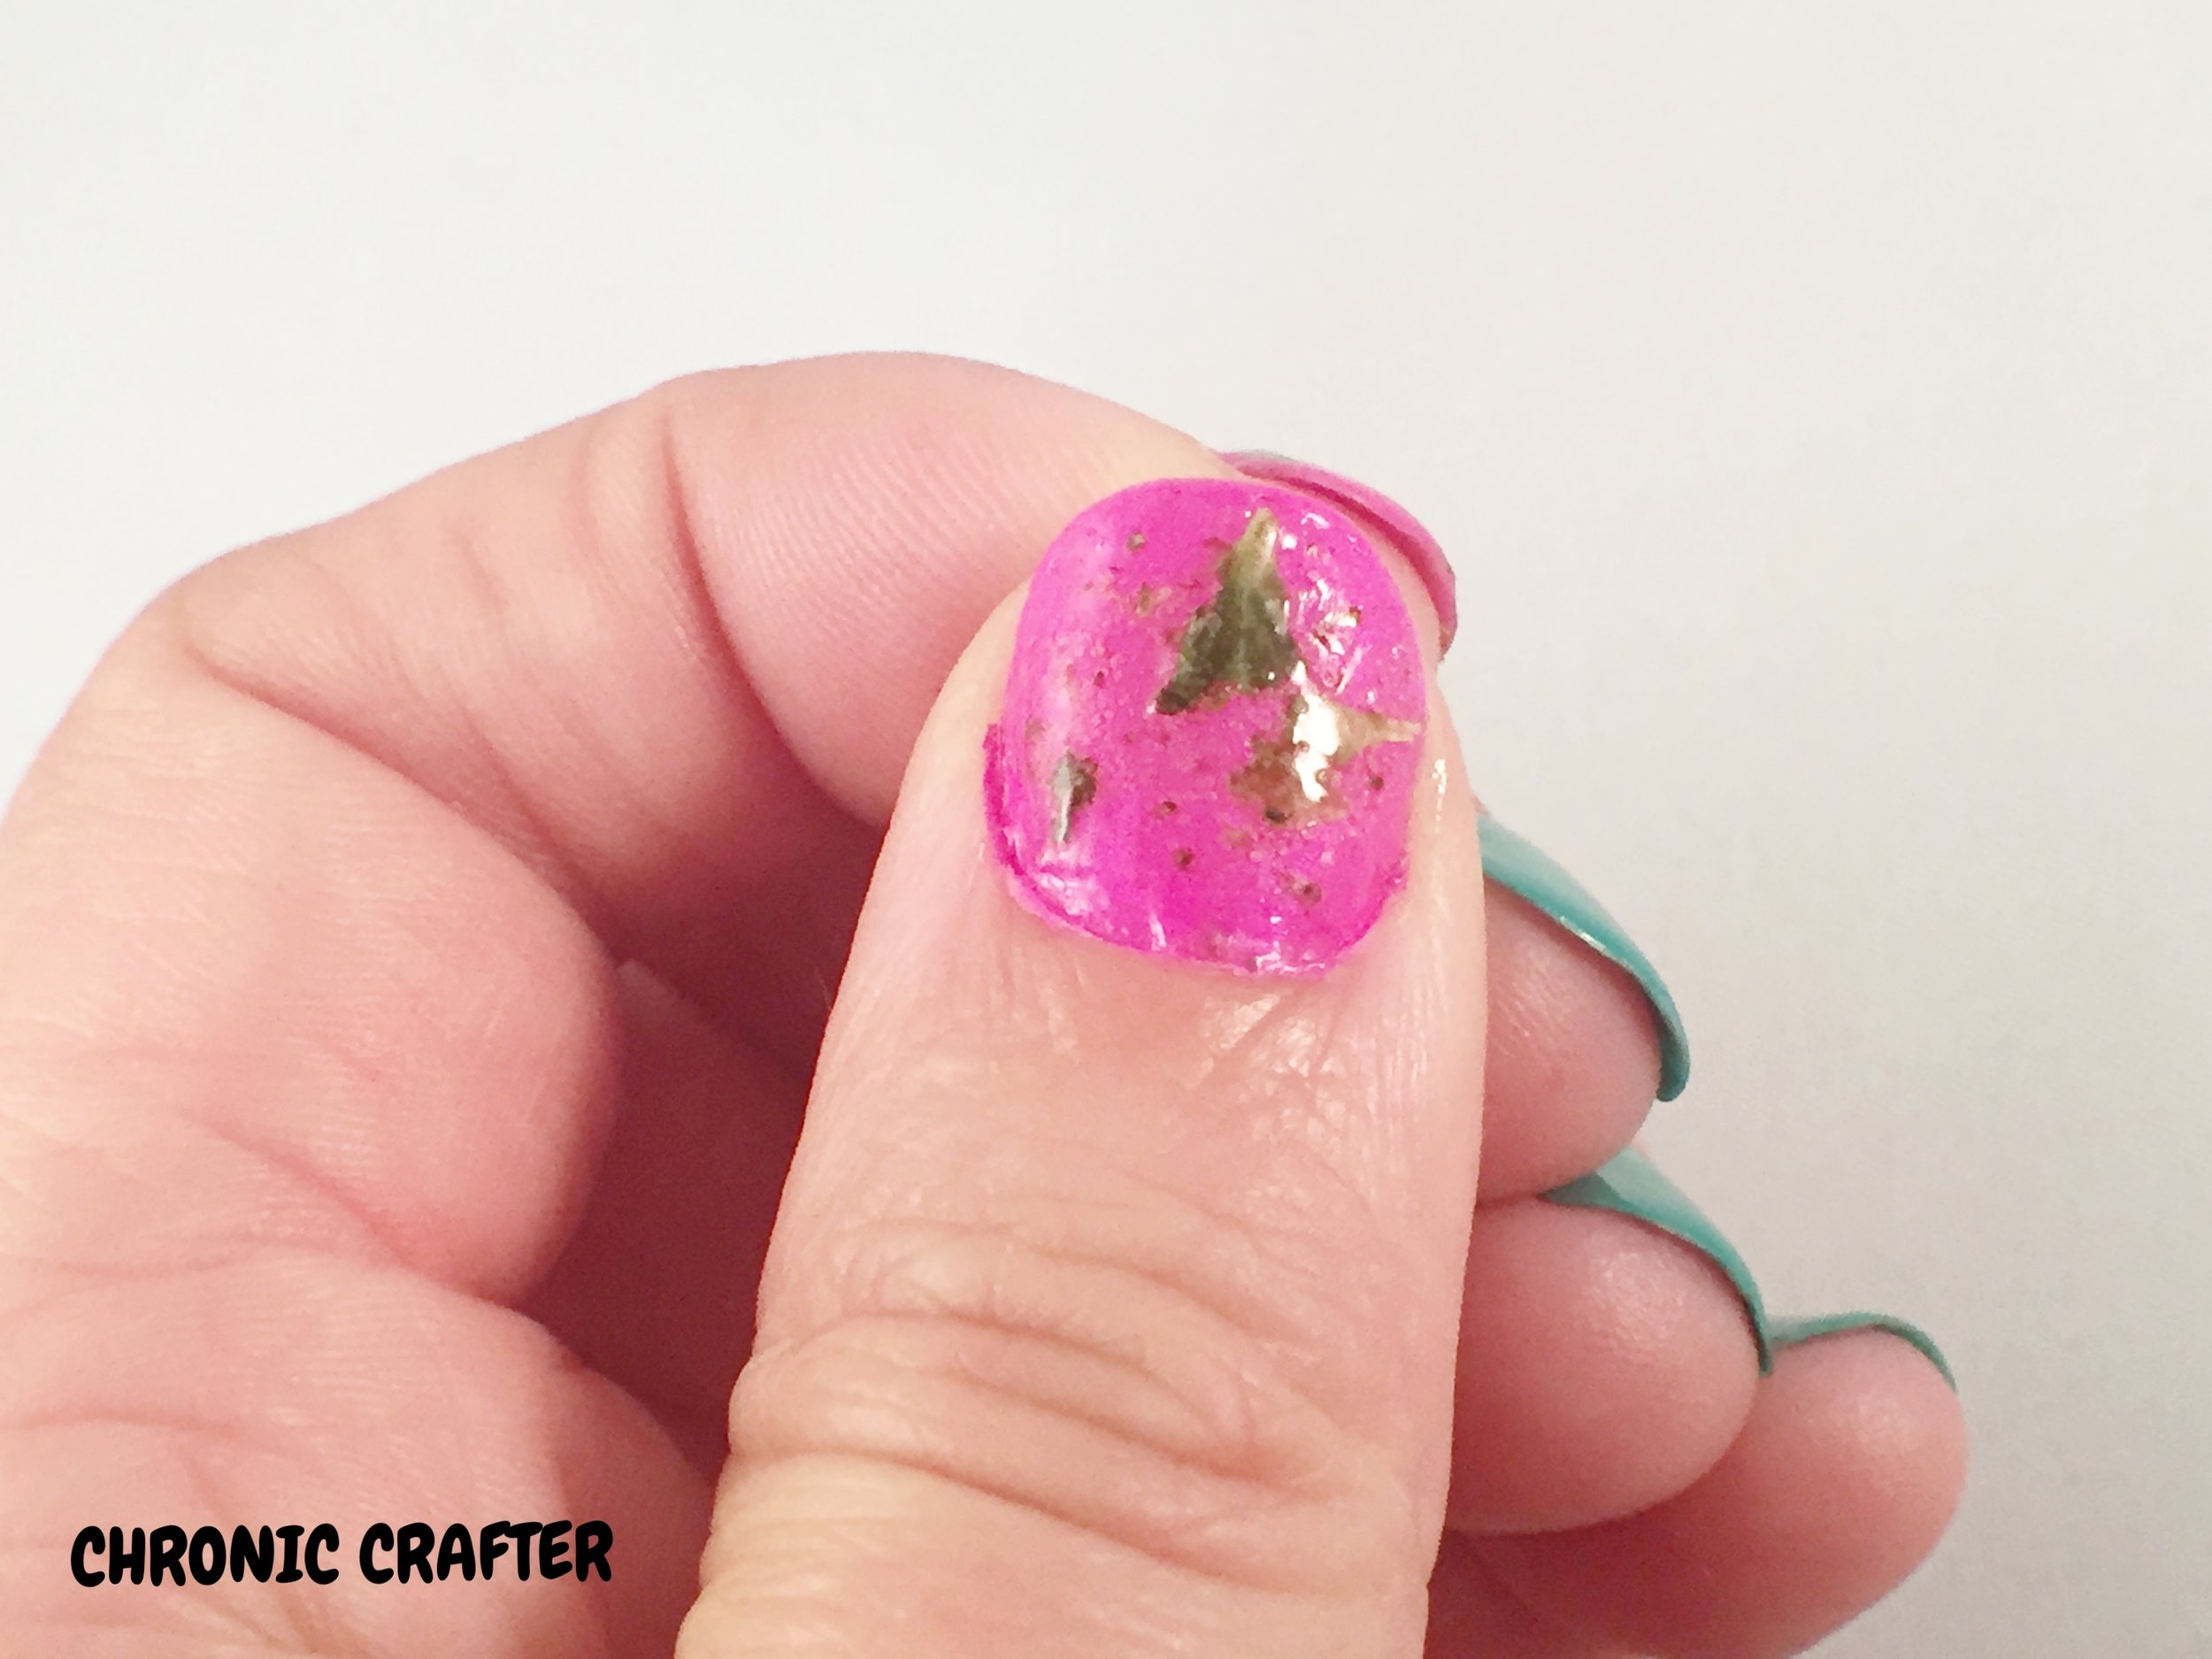 8. "Weed Nail Art Supplies" - wide 3